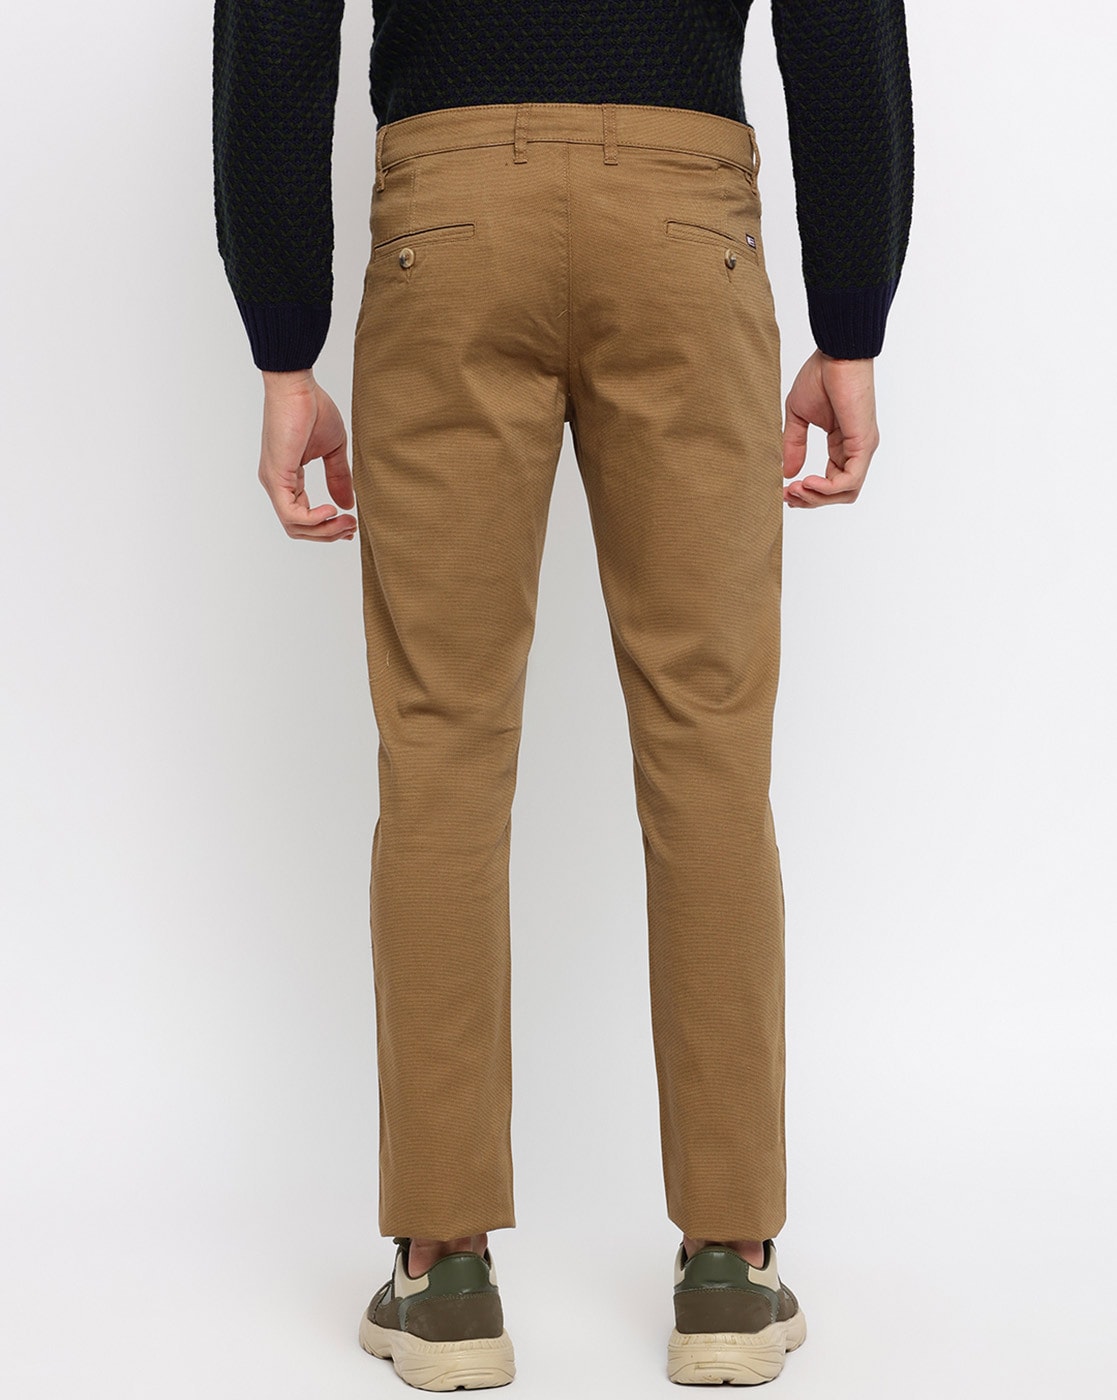 Buy Cantabil Men Olive Cotton Regular Fit Casual Trouser  (MTRC00091_Olive_30) at Amazon.in